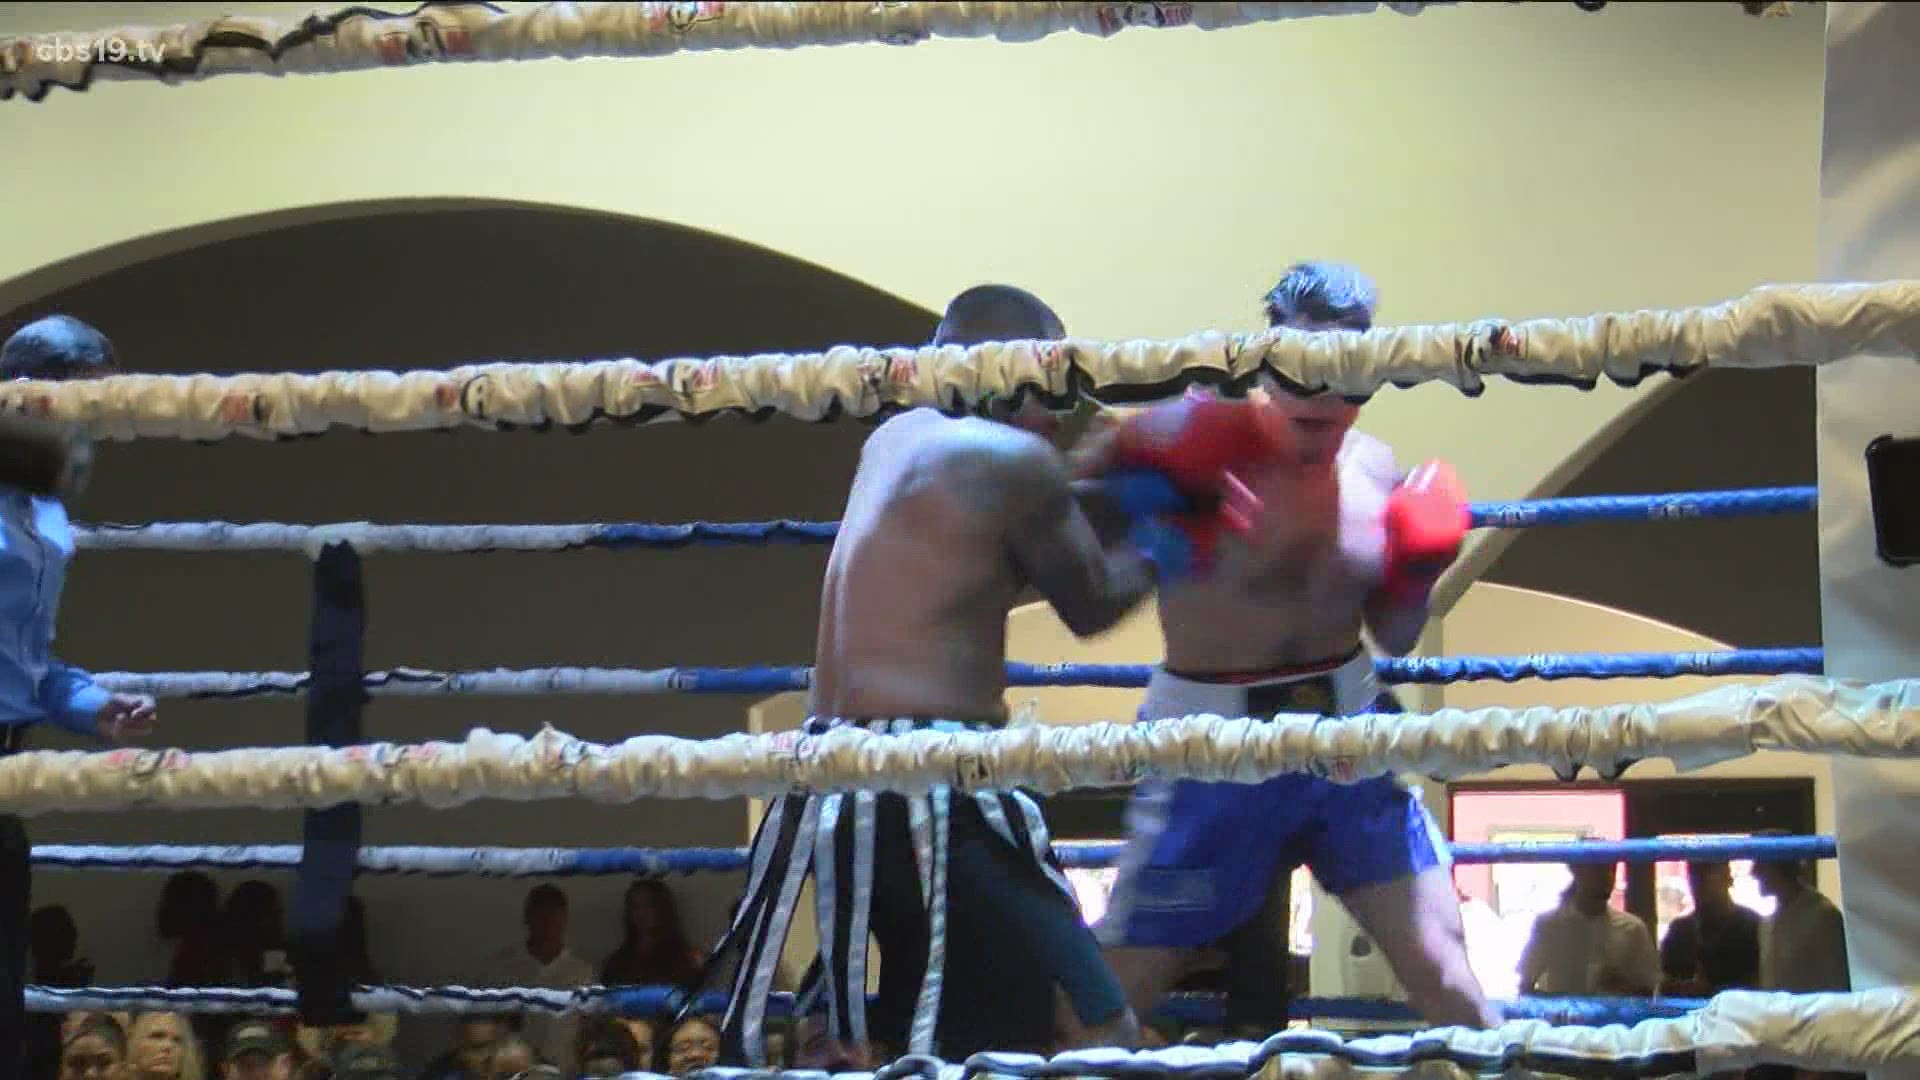 FIGHT NIGHT IN EAST TEXAS Best area boxers in action Saturday night cbs19